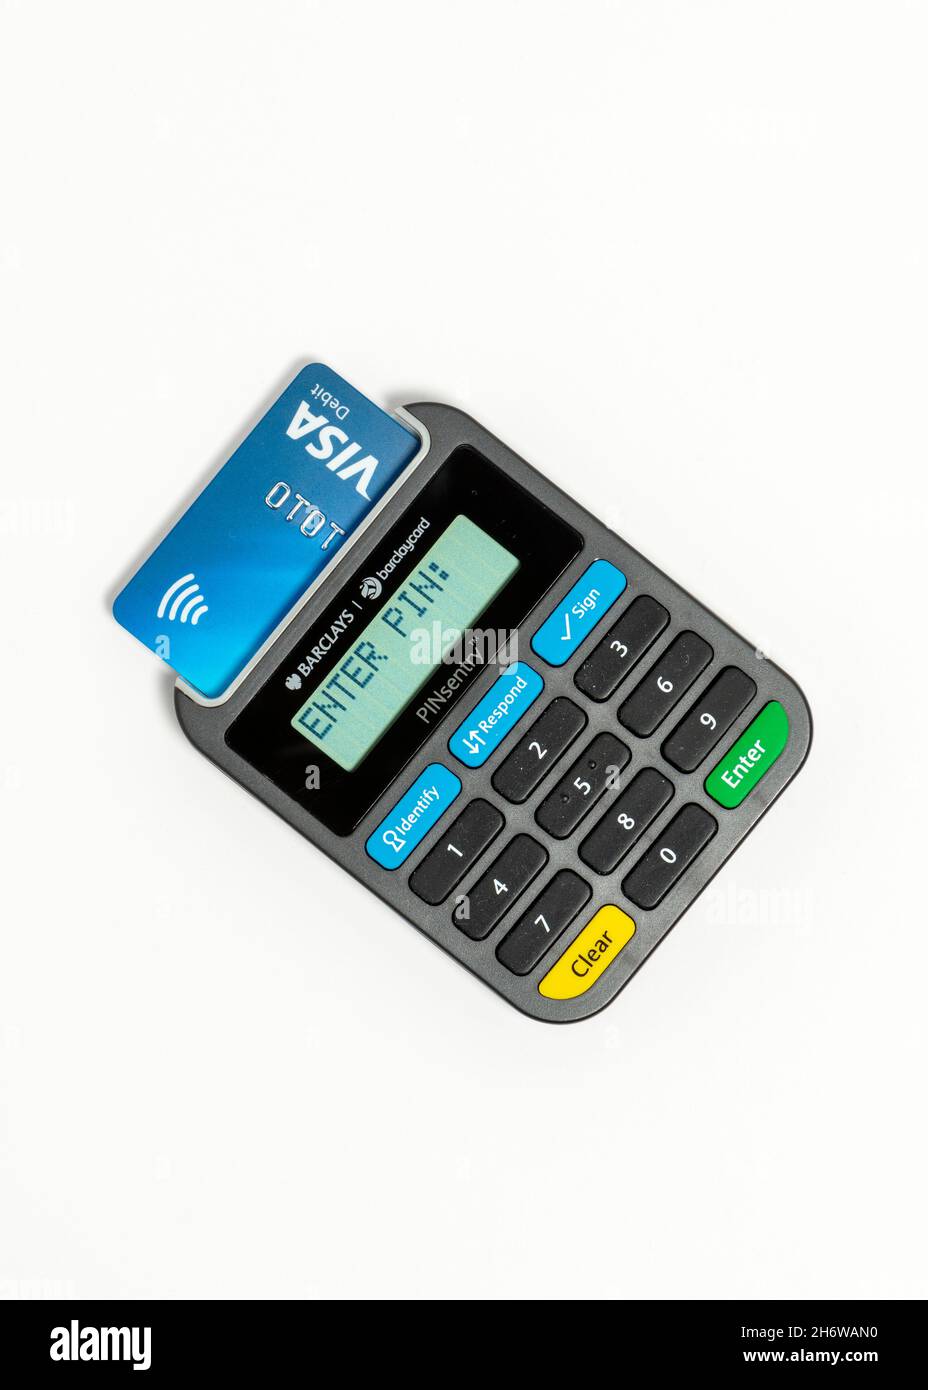 Enter Pin message on Barclays Pinsentry card reader Stock Photo